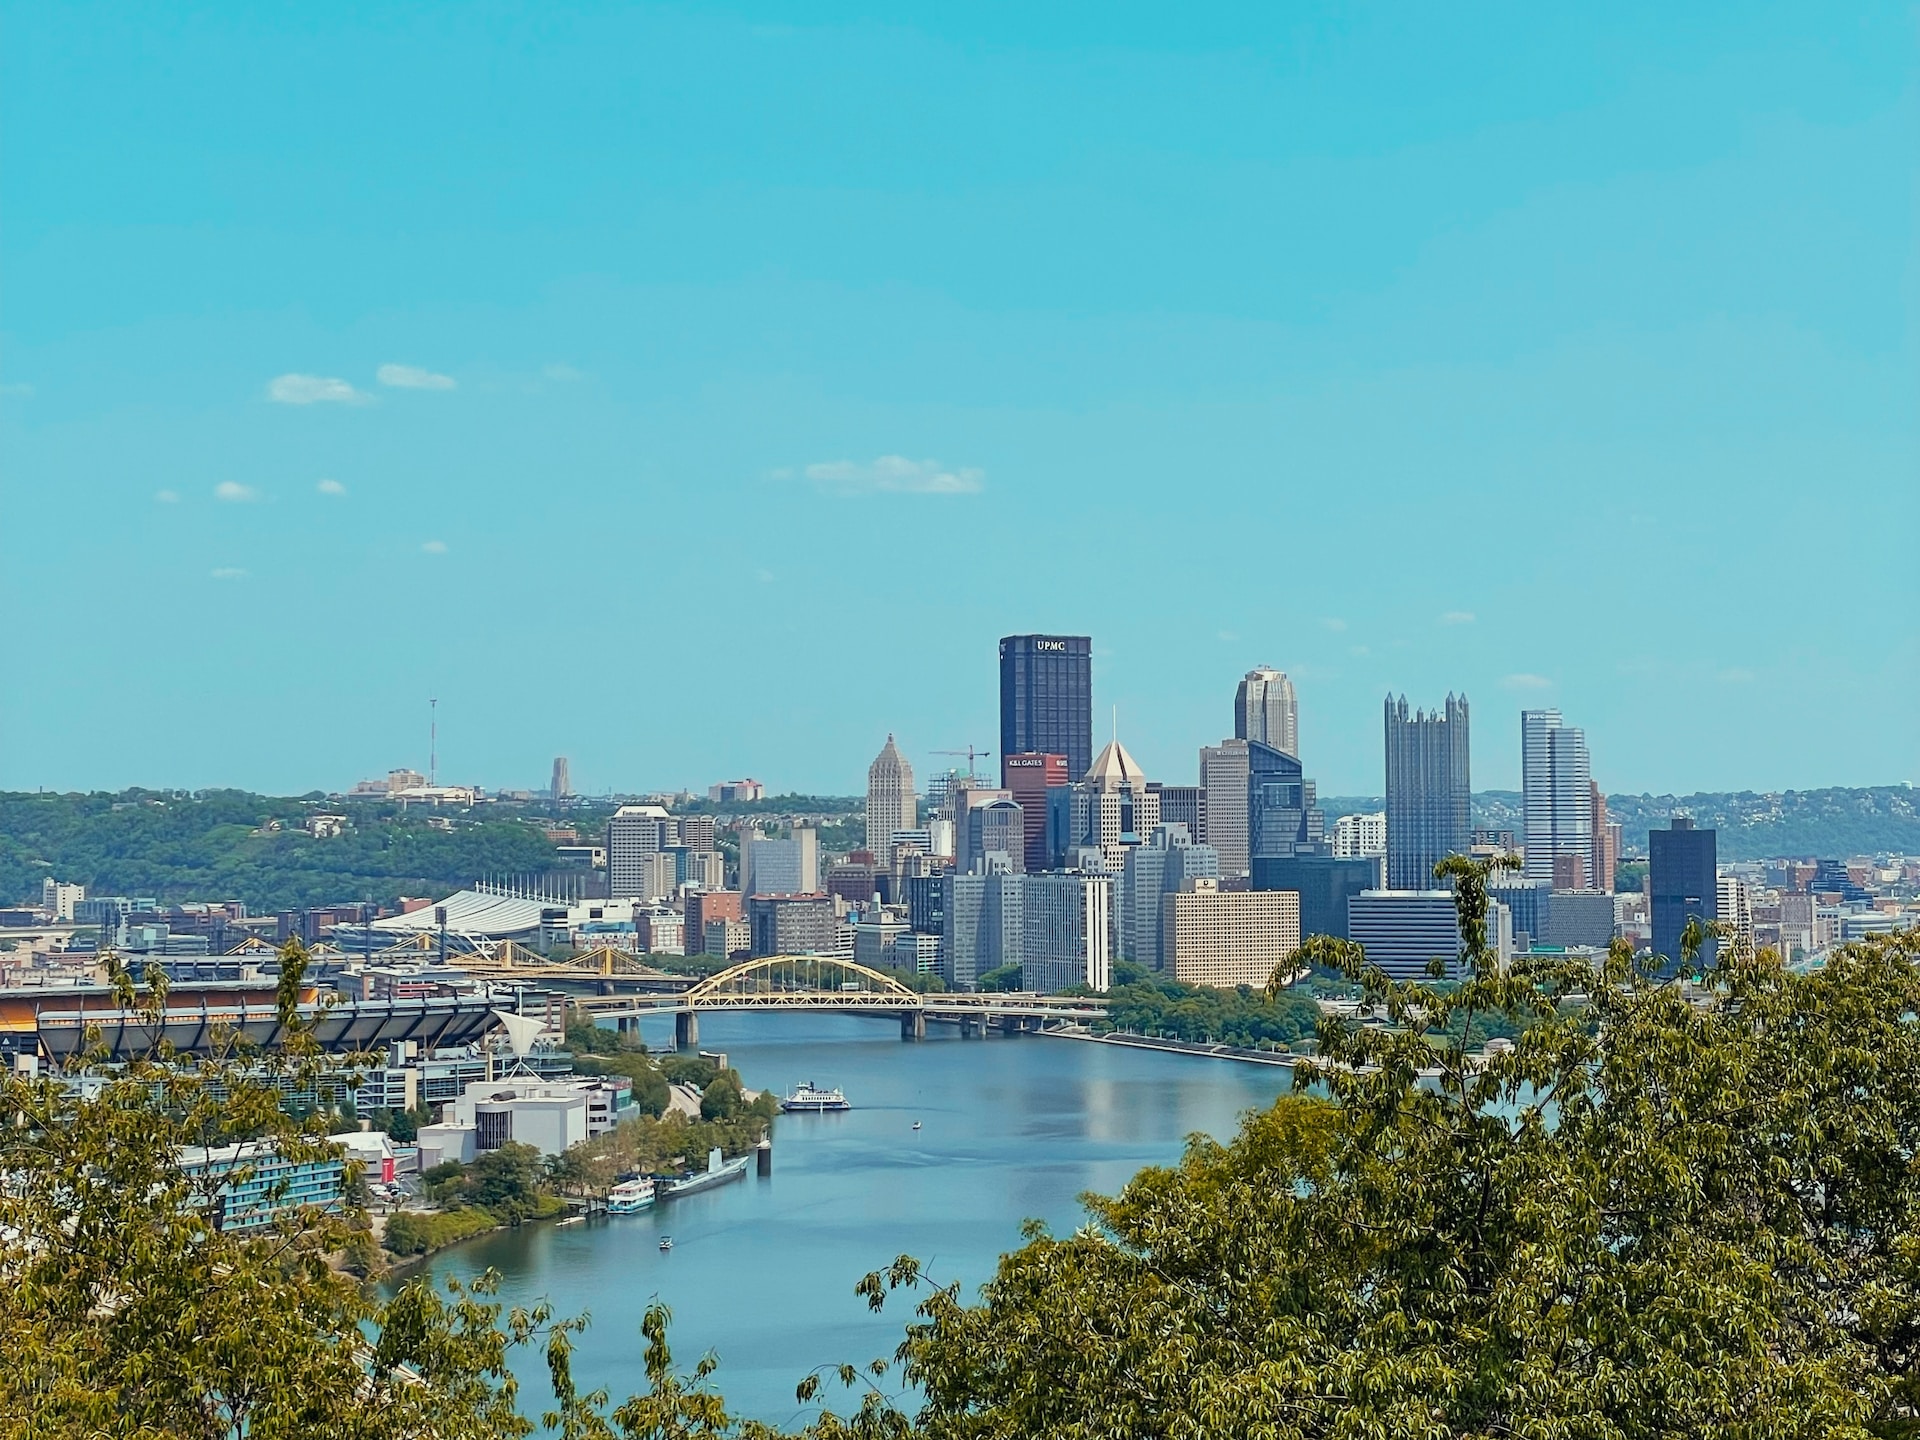 Chatham University is in Pittsburgh, pictured here including a river and yellow bridge